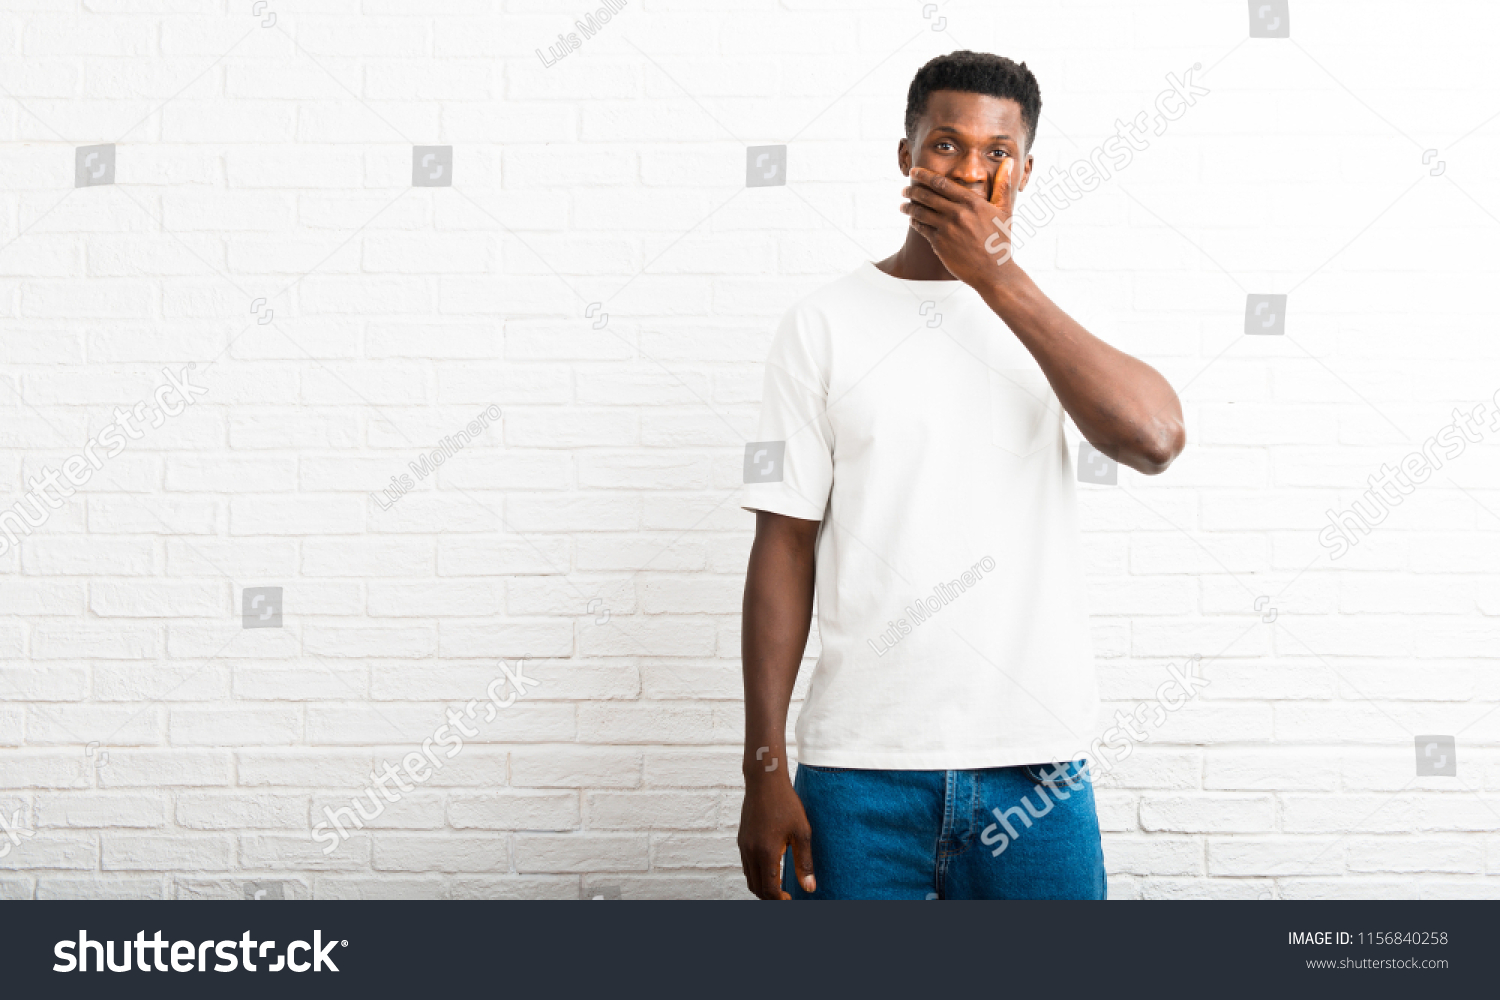 Dark skinned man covering mouth with hands for saying something inappropriate. Can not speak #1156840258